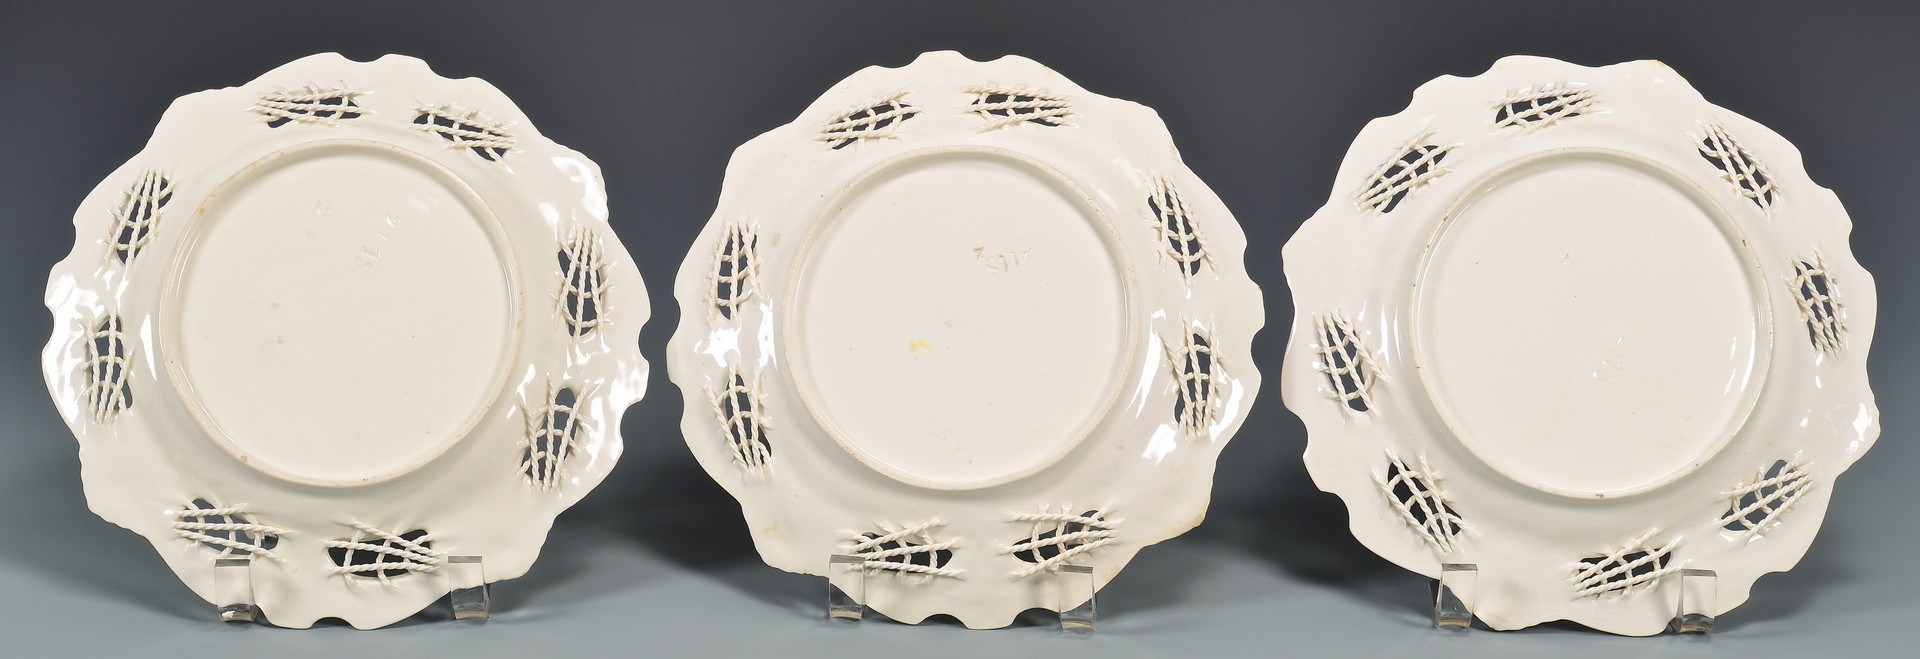 Lot 603: Group of English, French, German Porcelain, 11 tot